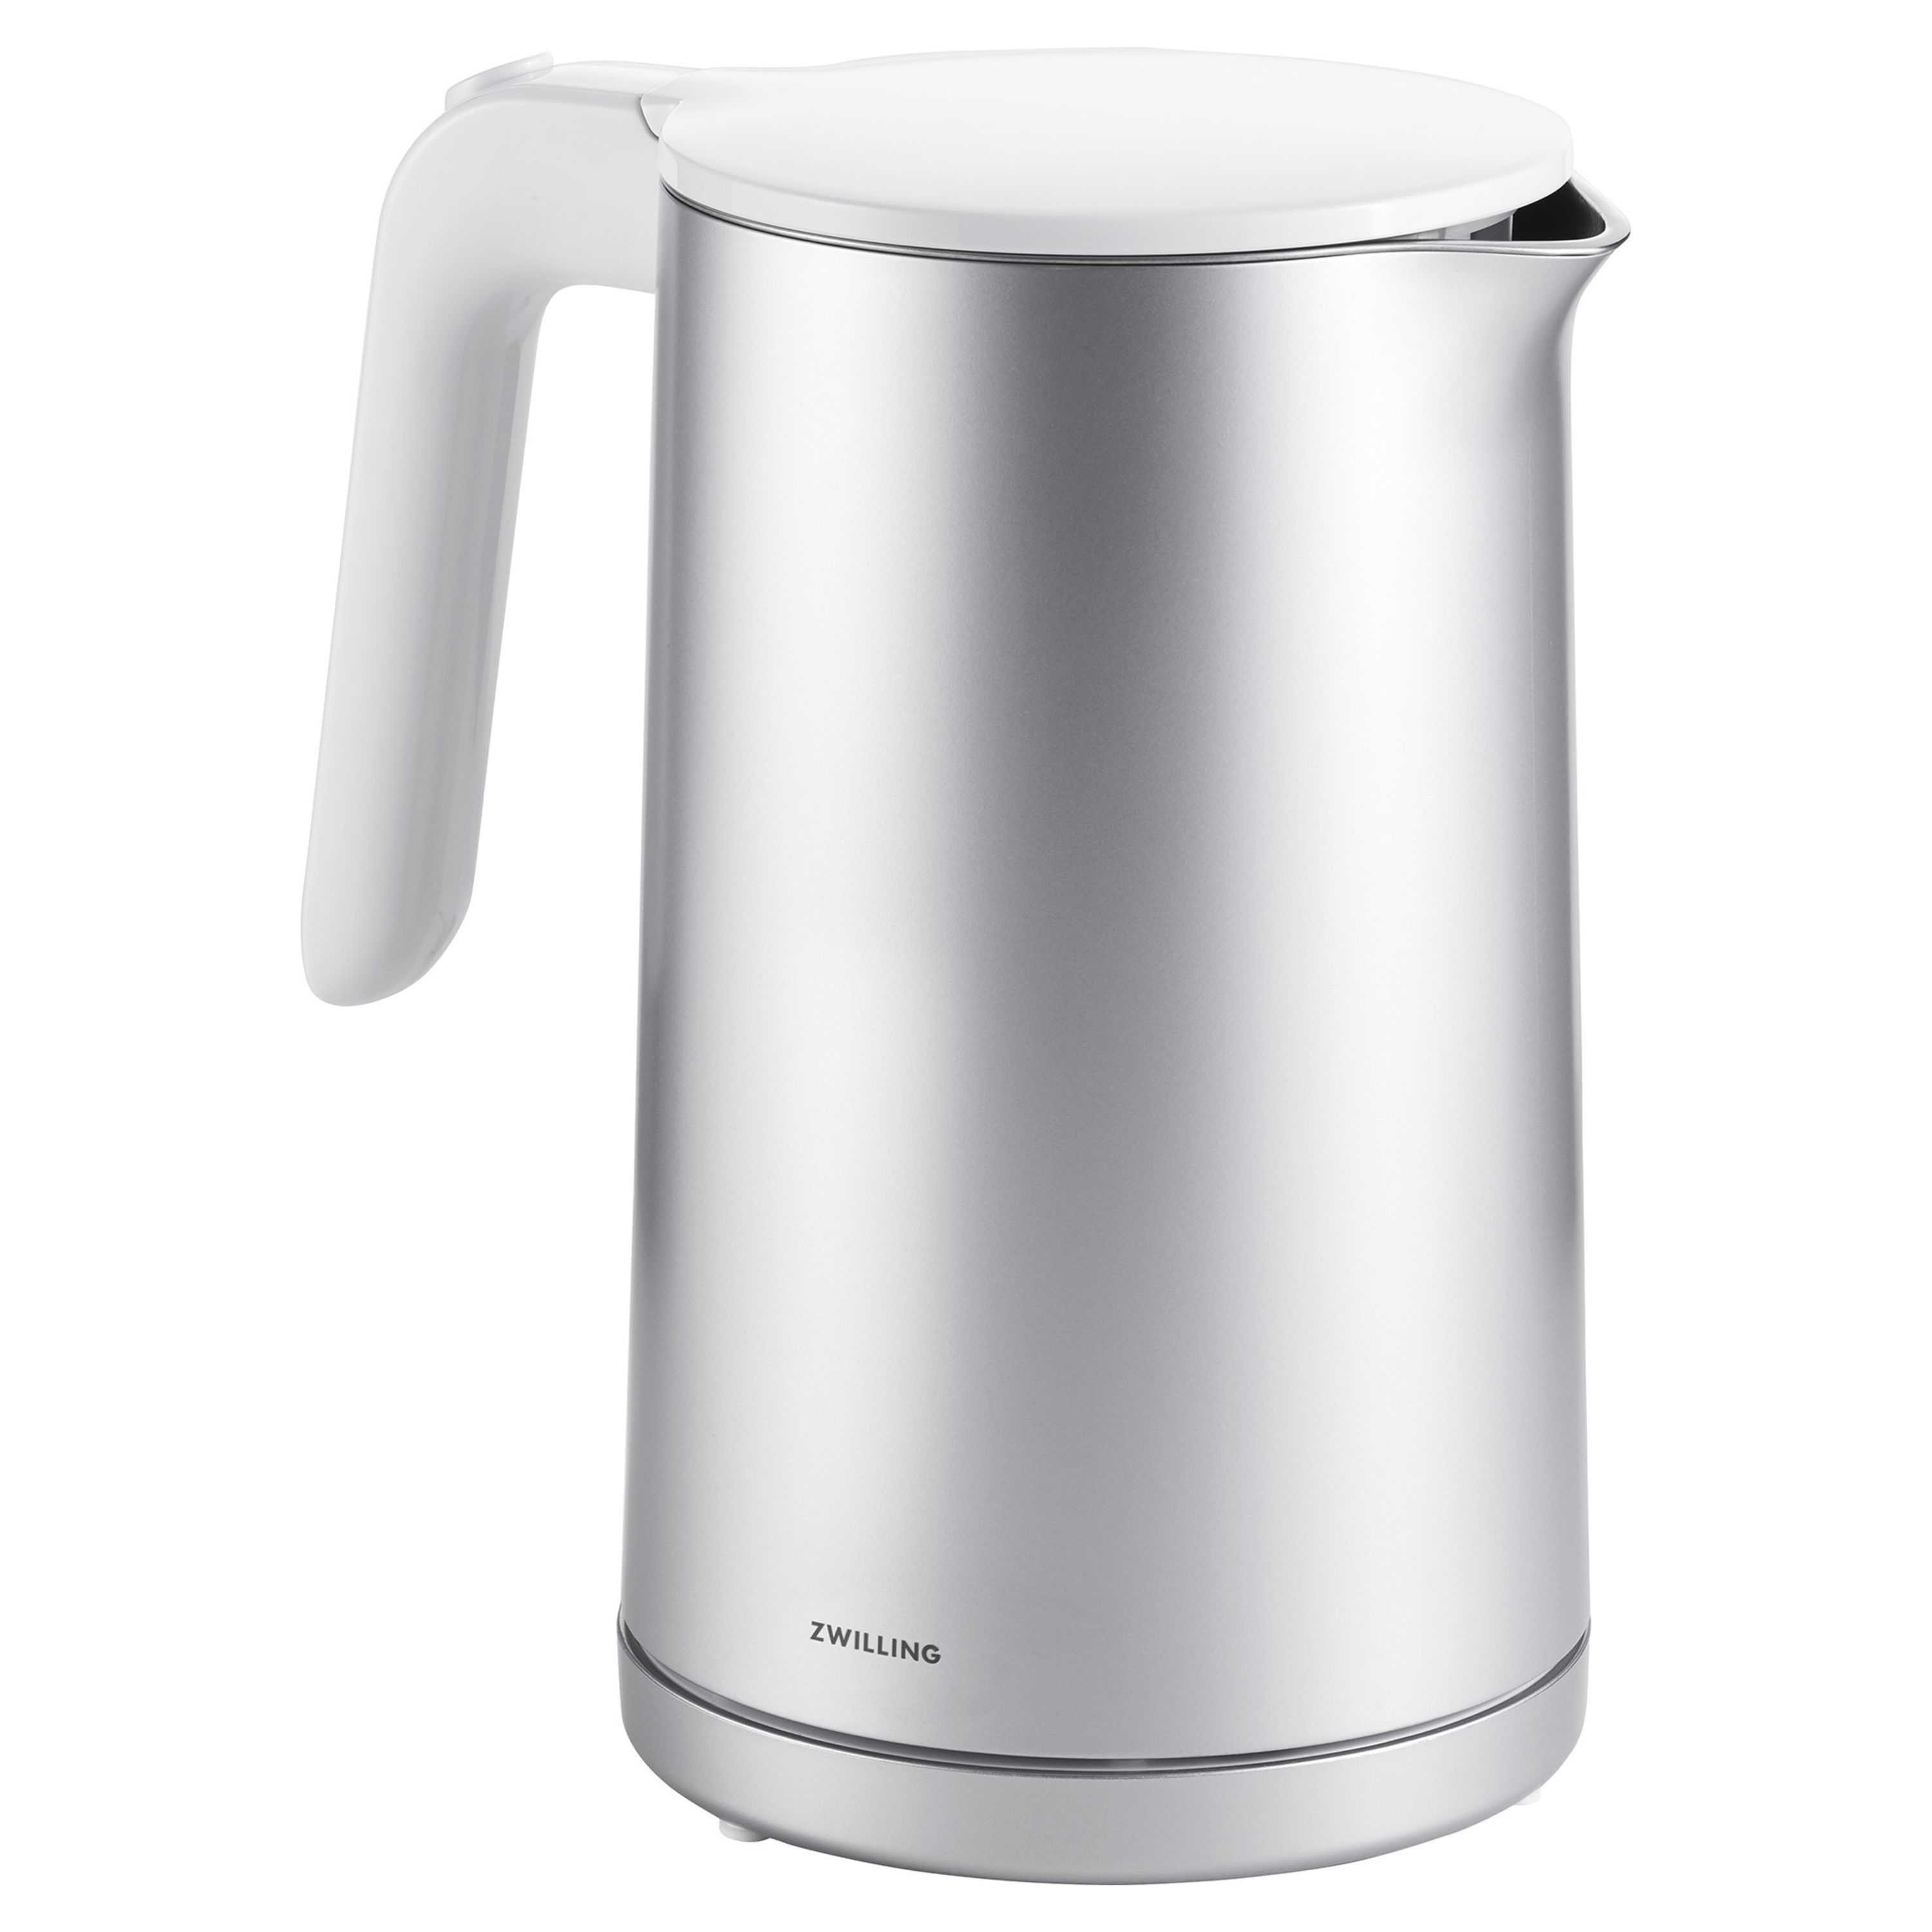 ZWILLING Enfinigy 1.5 l, Cool Touch Kettle